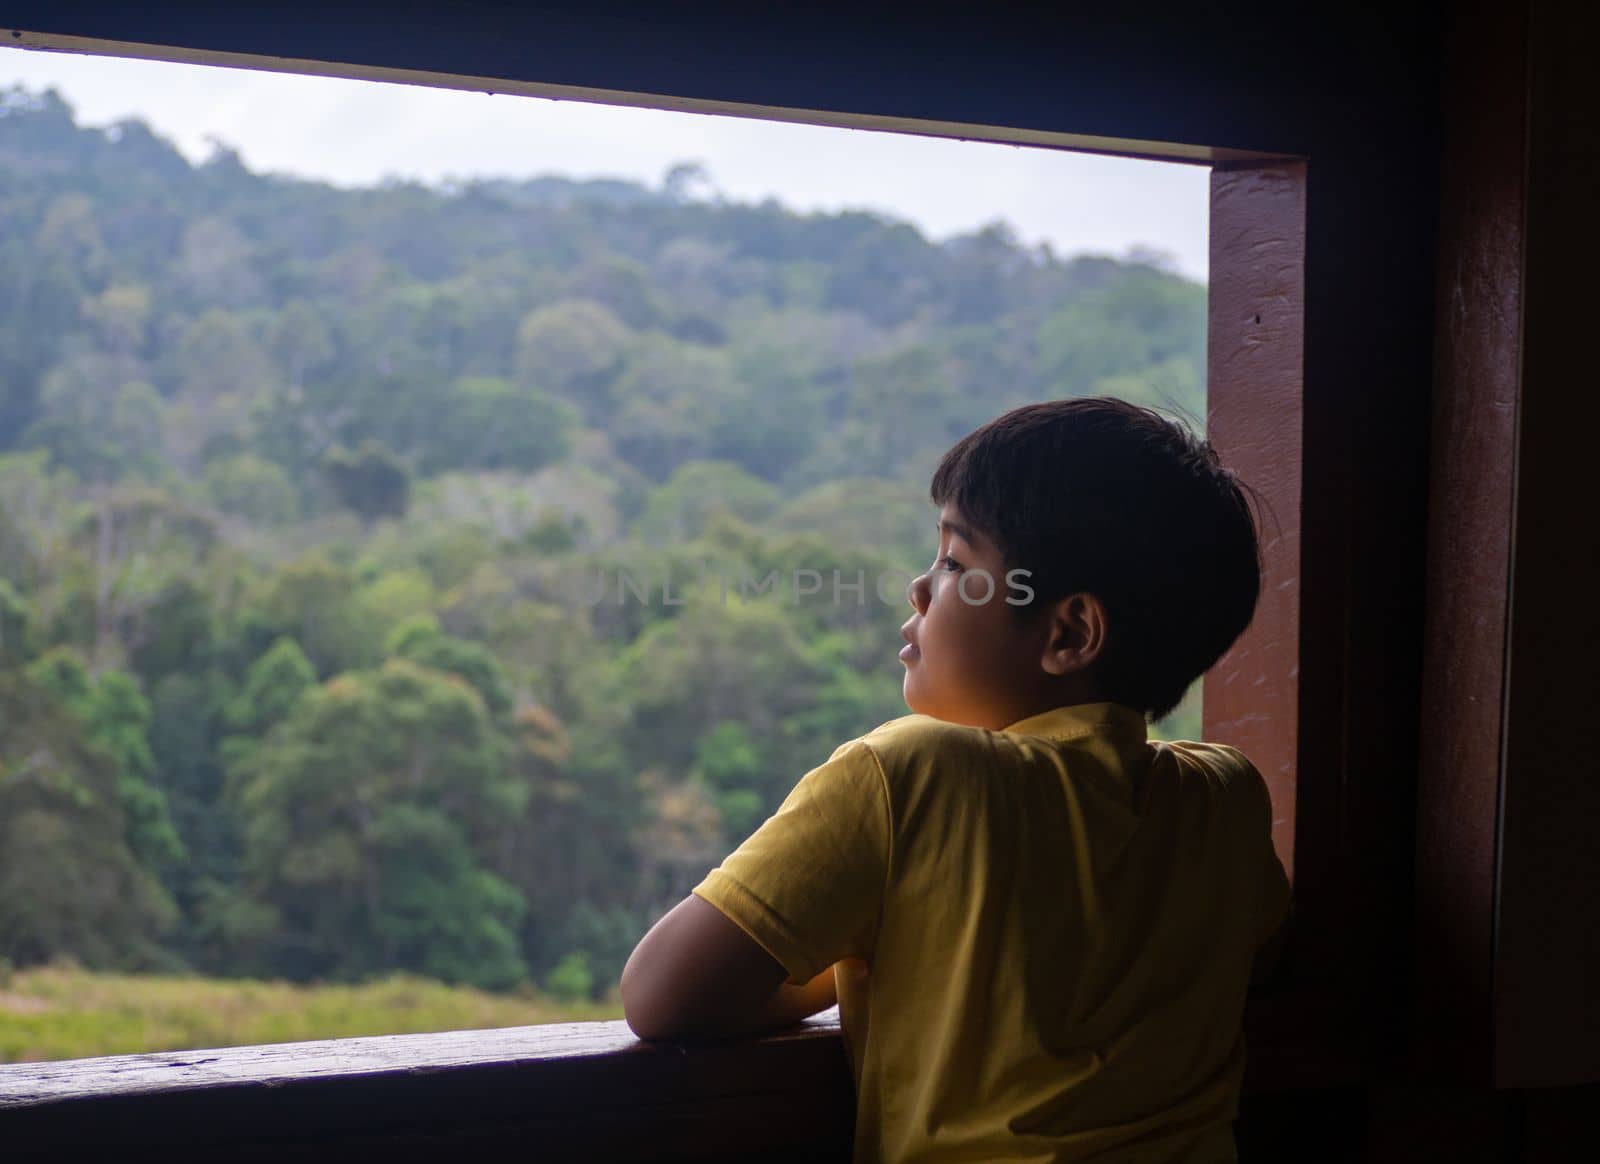 boy looking out window looking at the green forest by Unimages2527